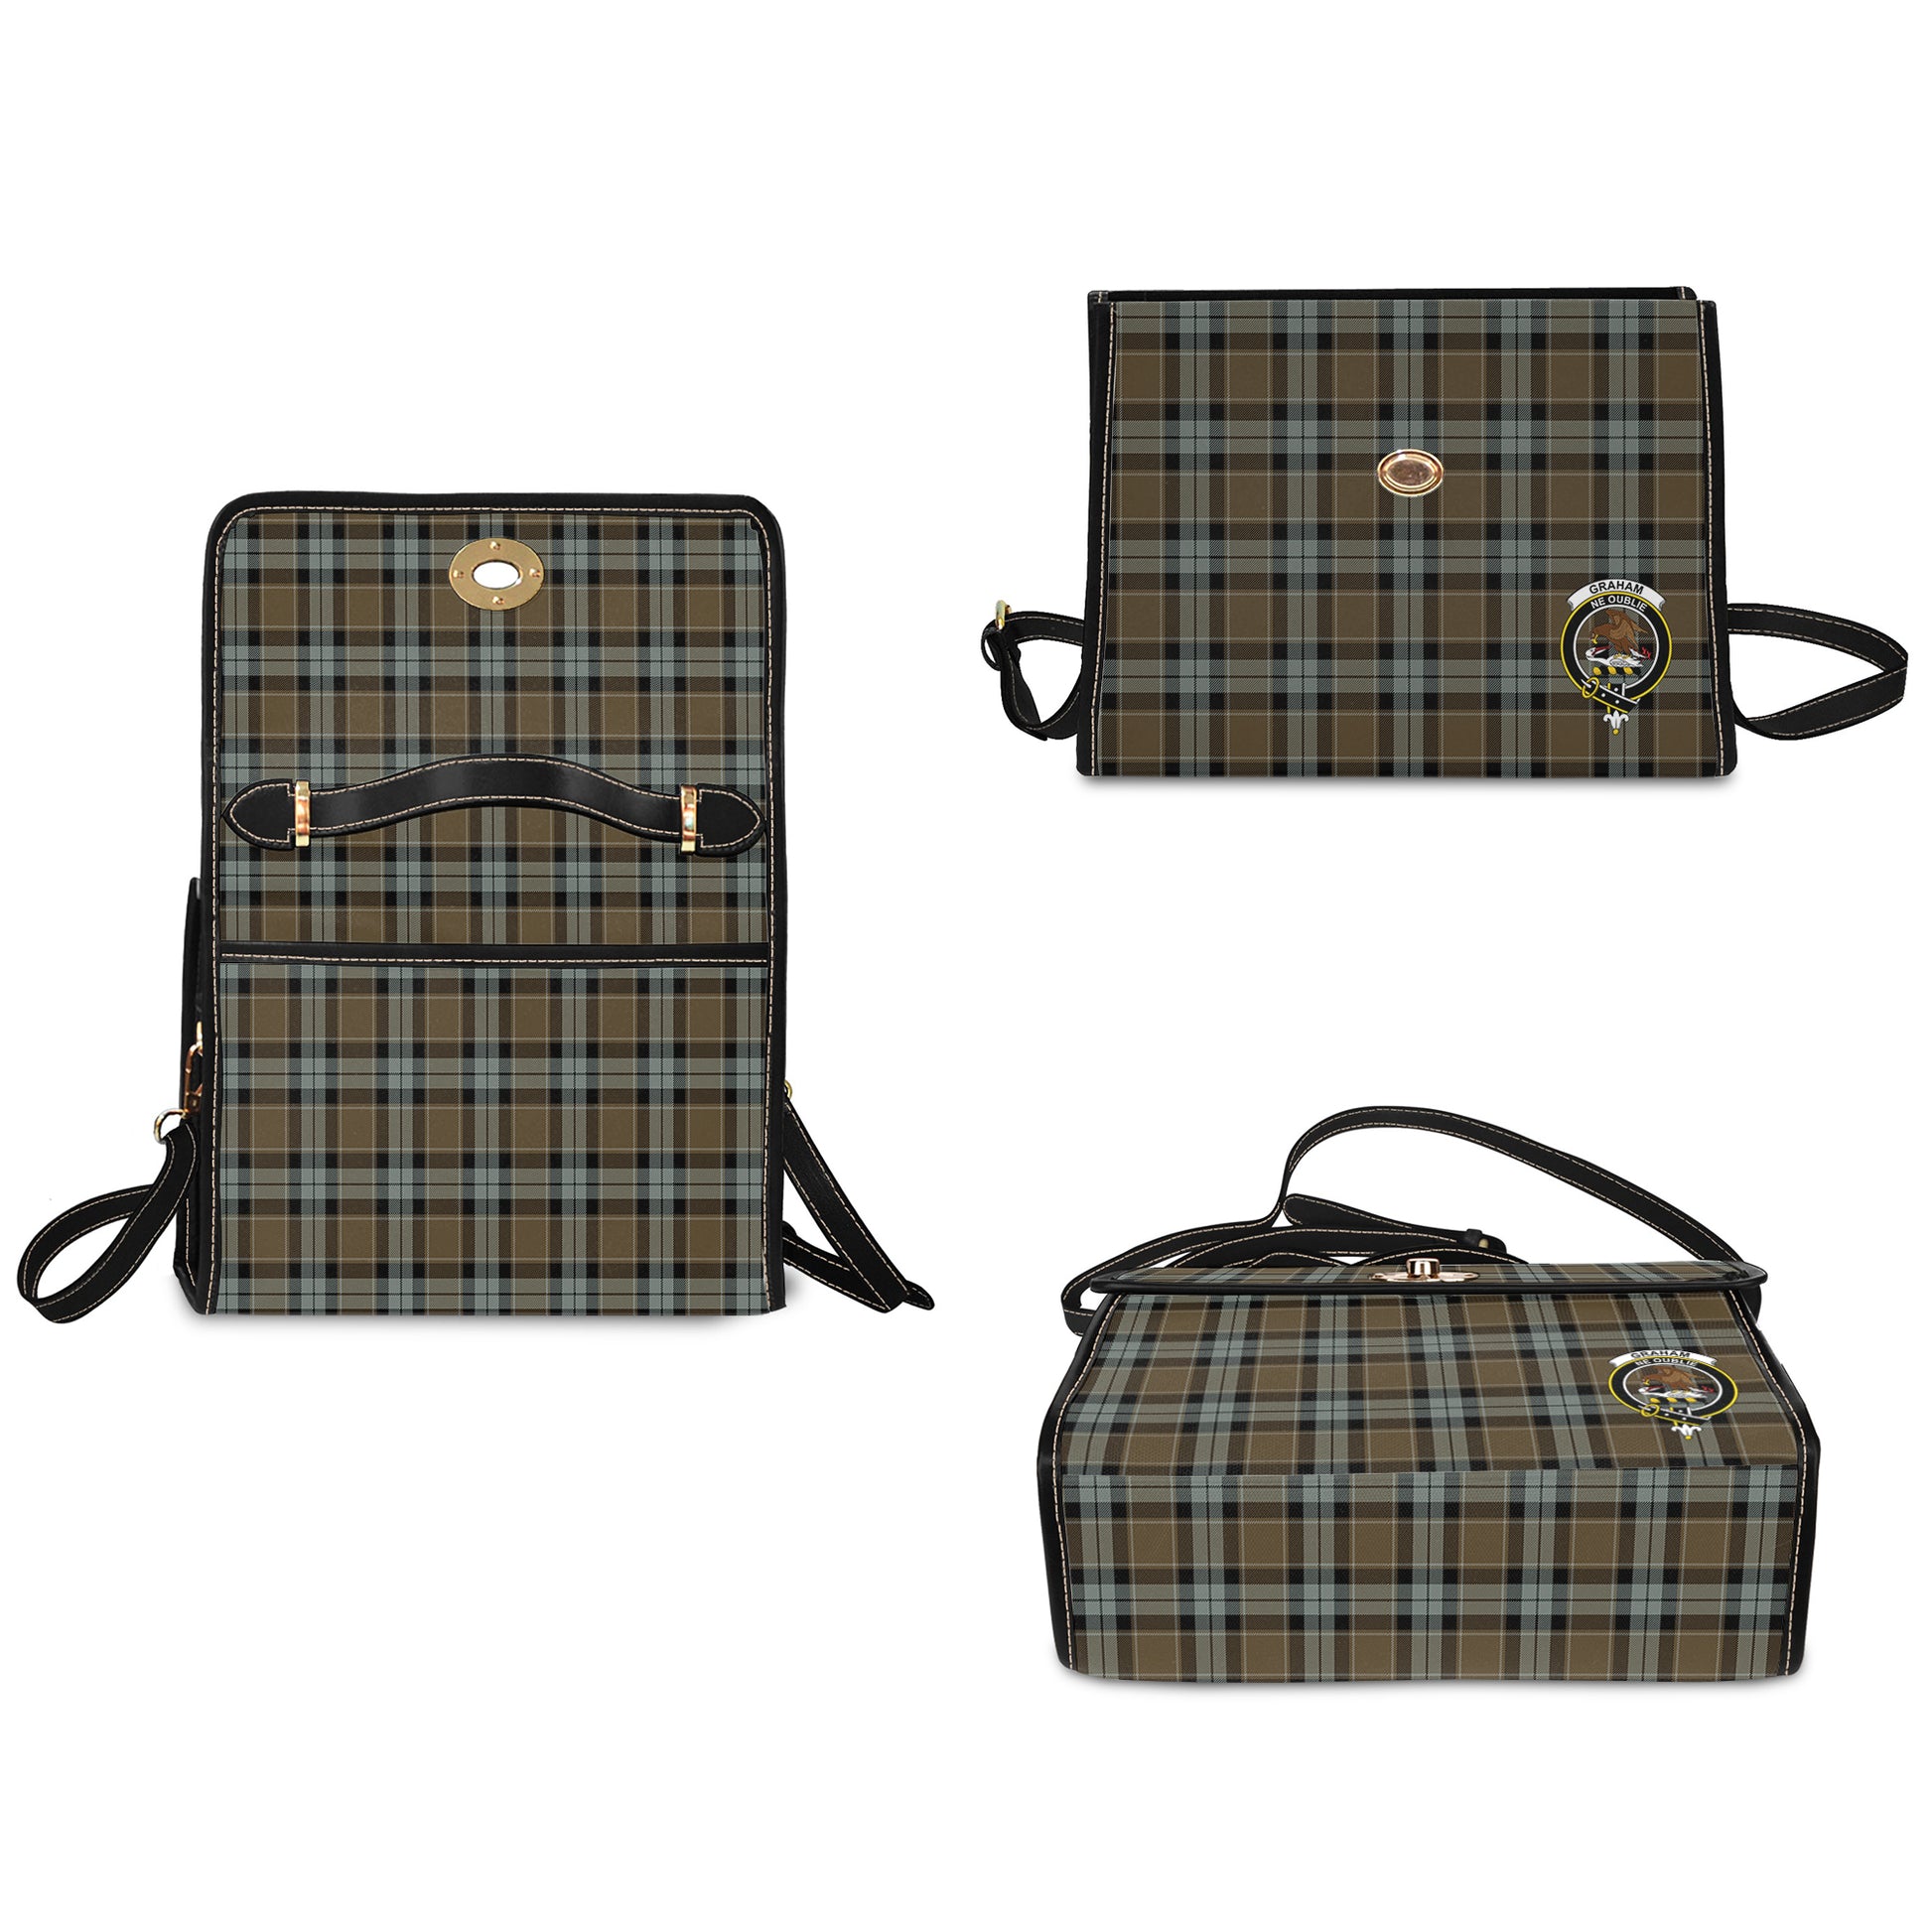 graham-of-menteith-weathered-tartan-leather-strap-waterproof-canvas-bag-with-family-crest